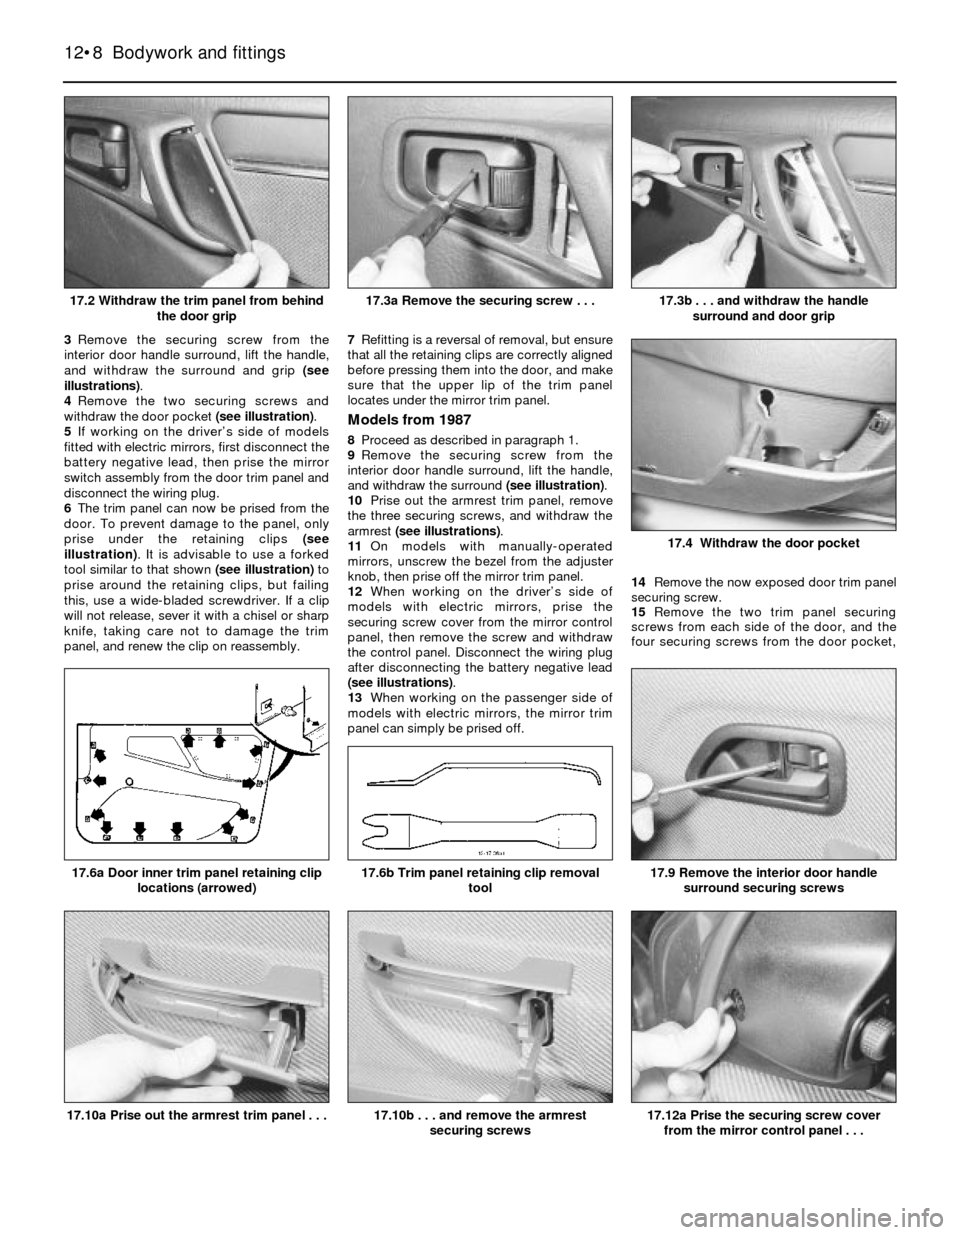 FORD SIERRA 1983 1.G Bodywork And Fittings Workshop Manual 3Remove the securing screw from the
interior door handle surround, lift the handle,
and withdraw the surround and grip (see
illustrations).
4Remove the two securing screws and
withdraw the door pocket